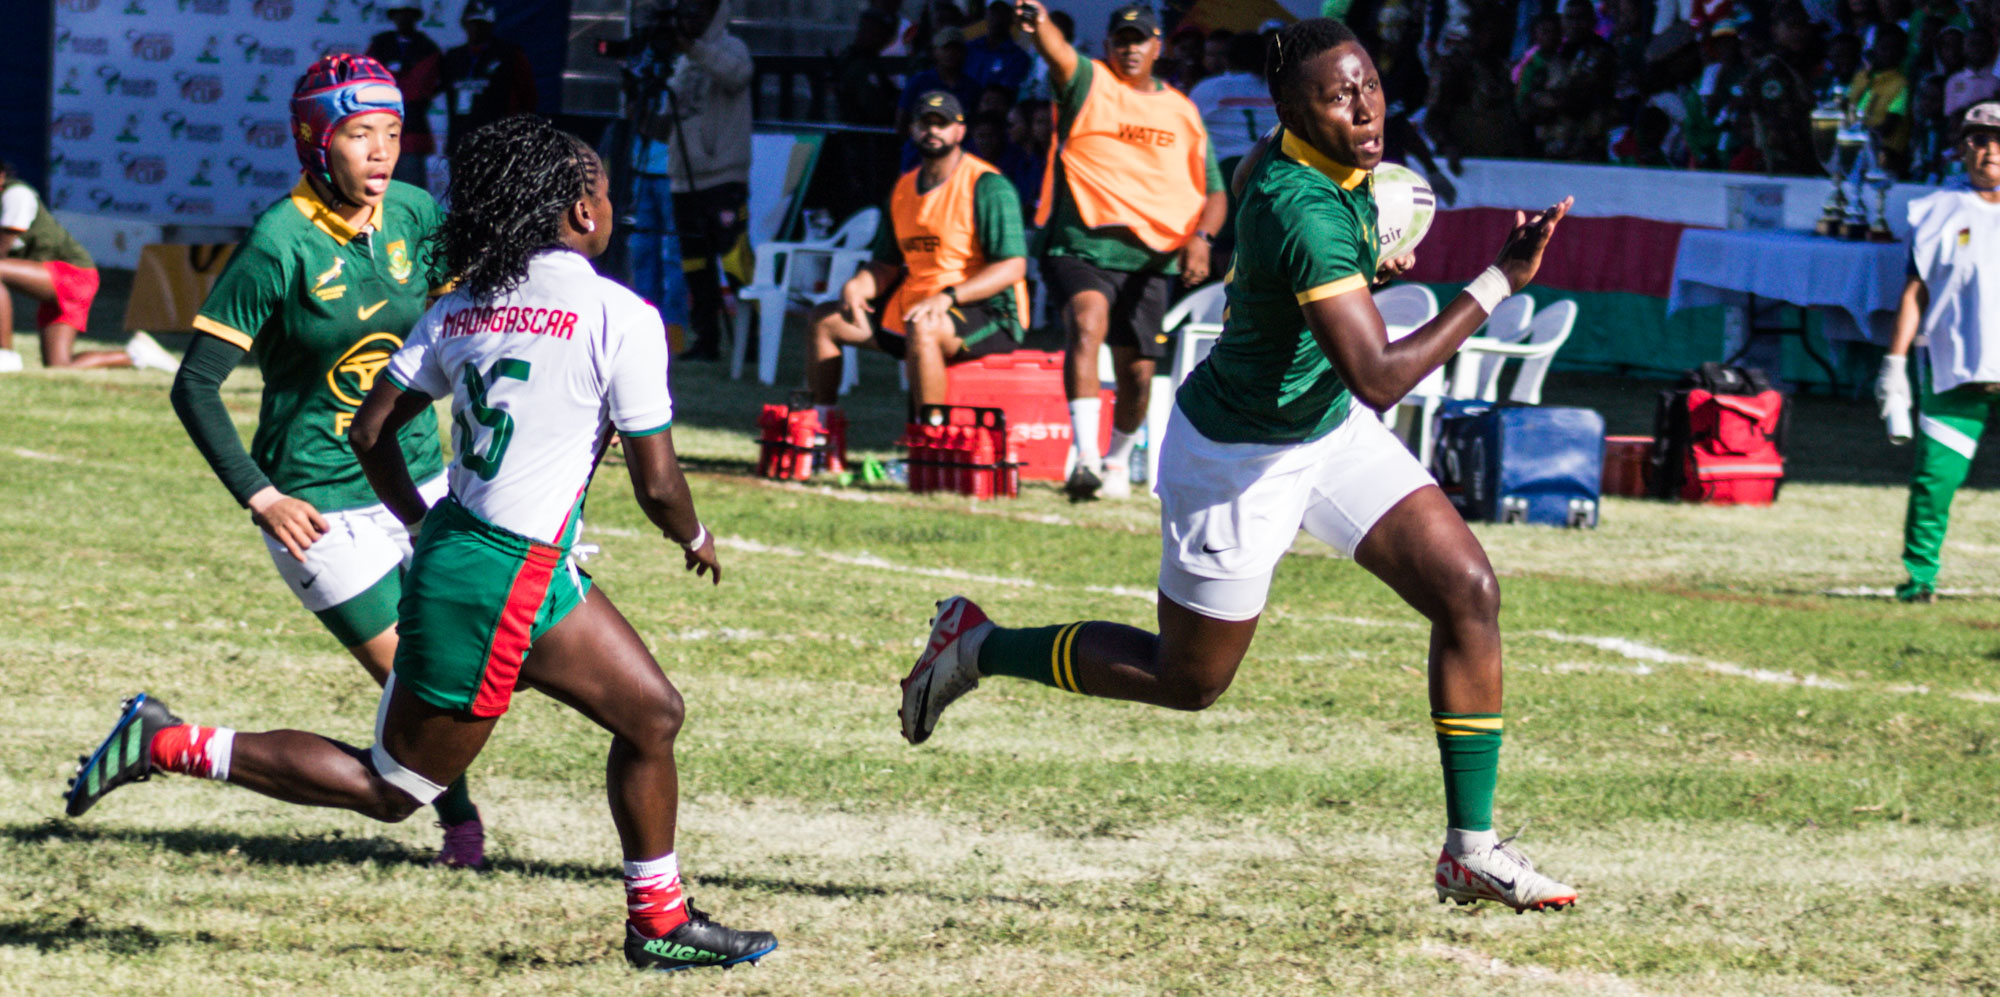 Sikholiwe Mdletshe again scored two tries for South Africa.